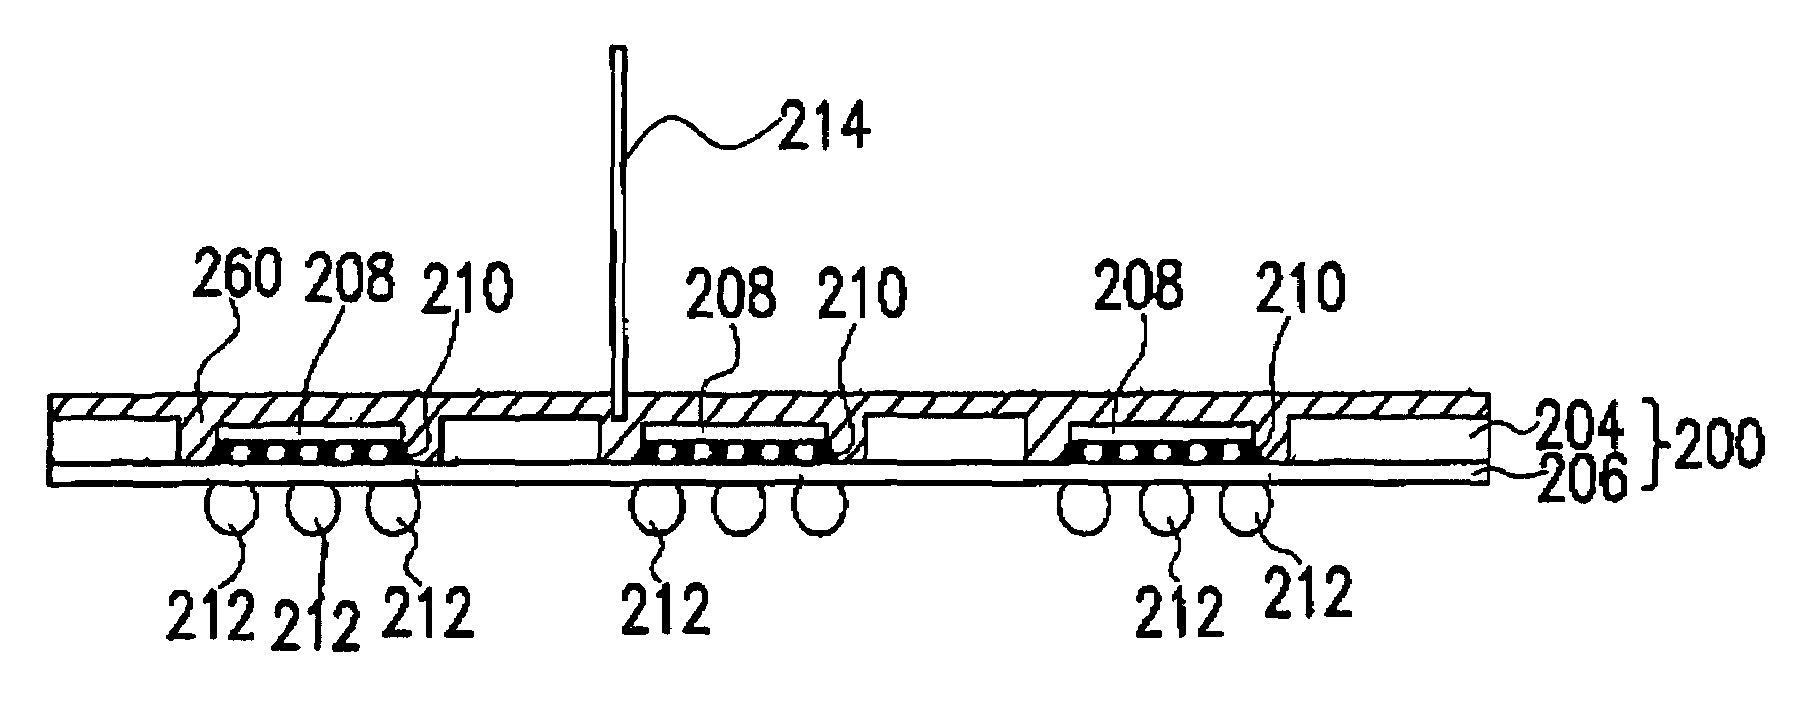 Method of fabricating flip chip ball grid array package